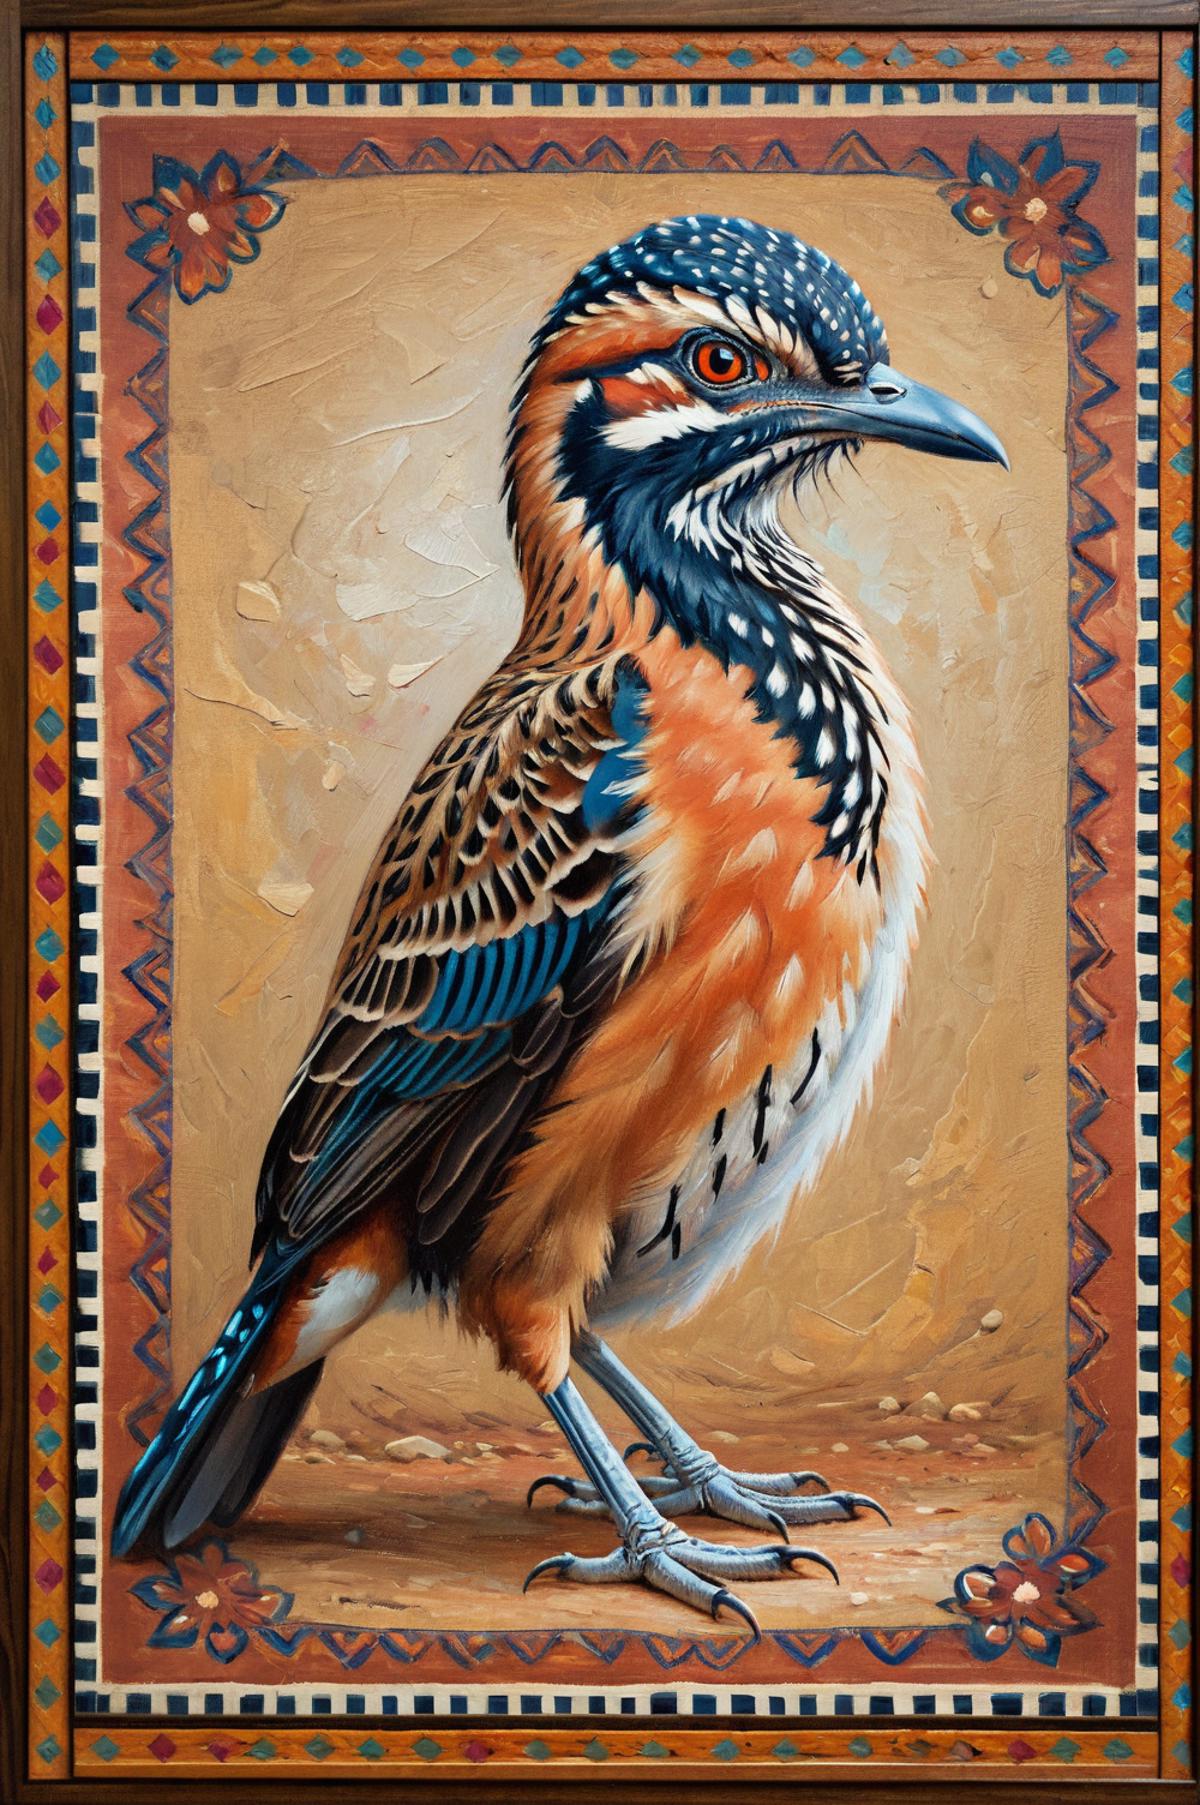 A colorful bird with blue and orange feathers, standing on a dirt ground.